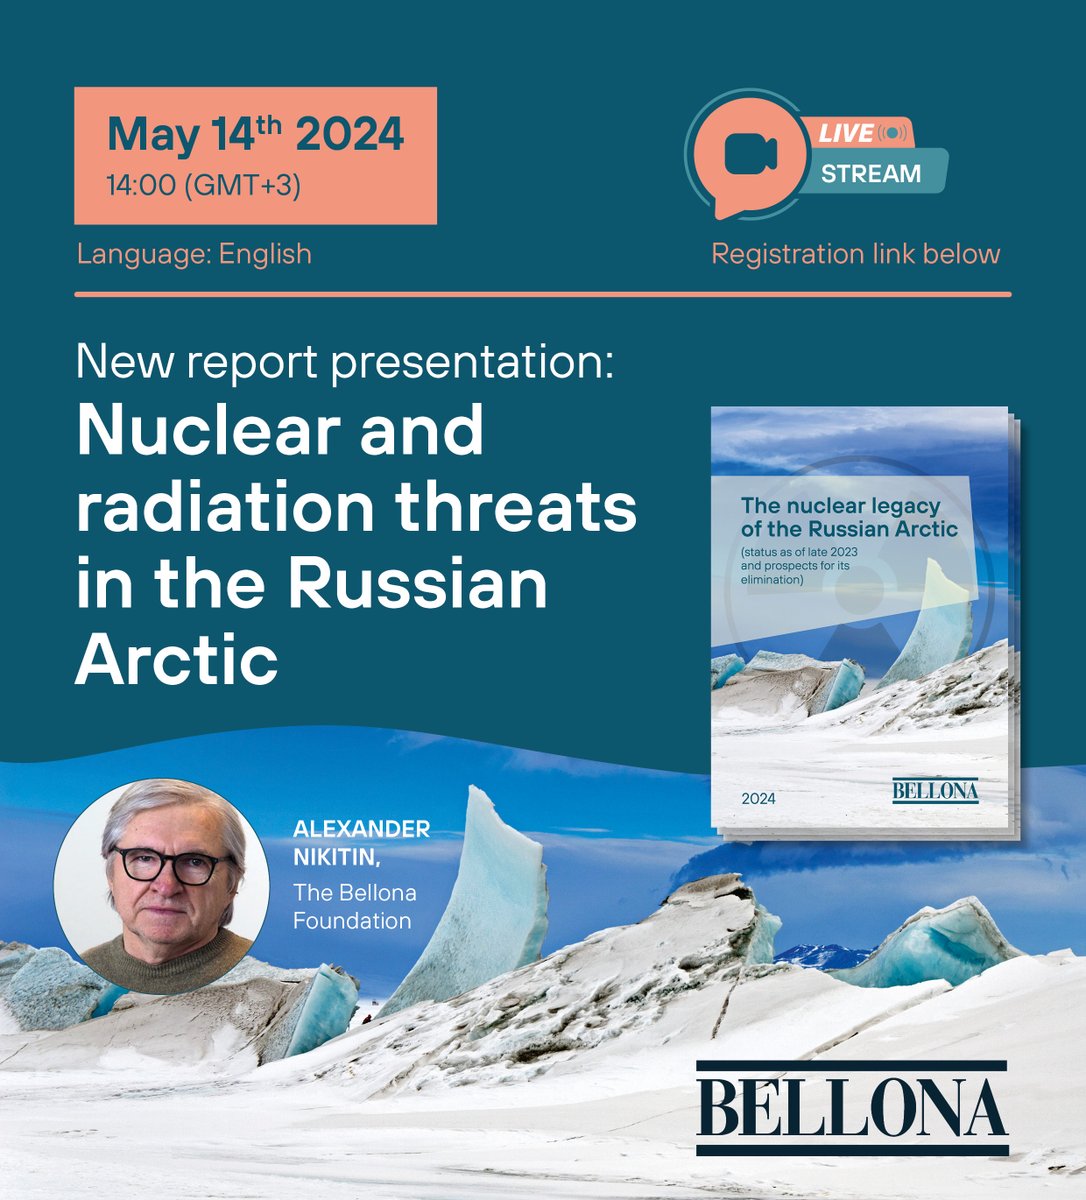 As Russian money goes to war instead of environmental protection, the Russian Arctic remains a radiation threat. The nuclear advisors @Bellona_etc will host an online event. 👉Register to get access to report and stream, ask us Q. during the Q&A session: forms.gle/LukPJsSJd9Pqtz…